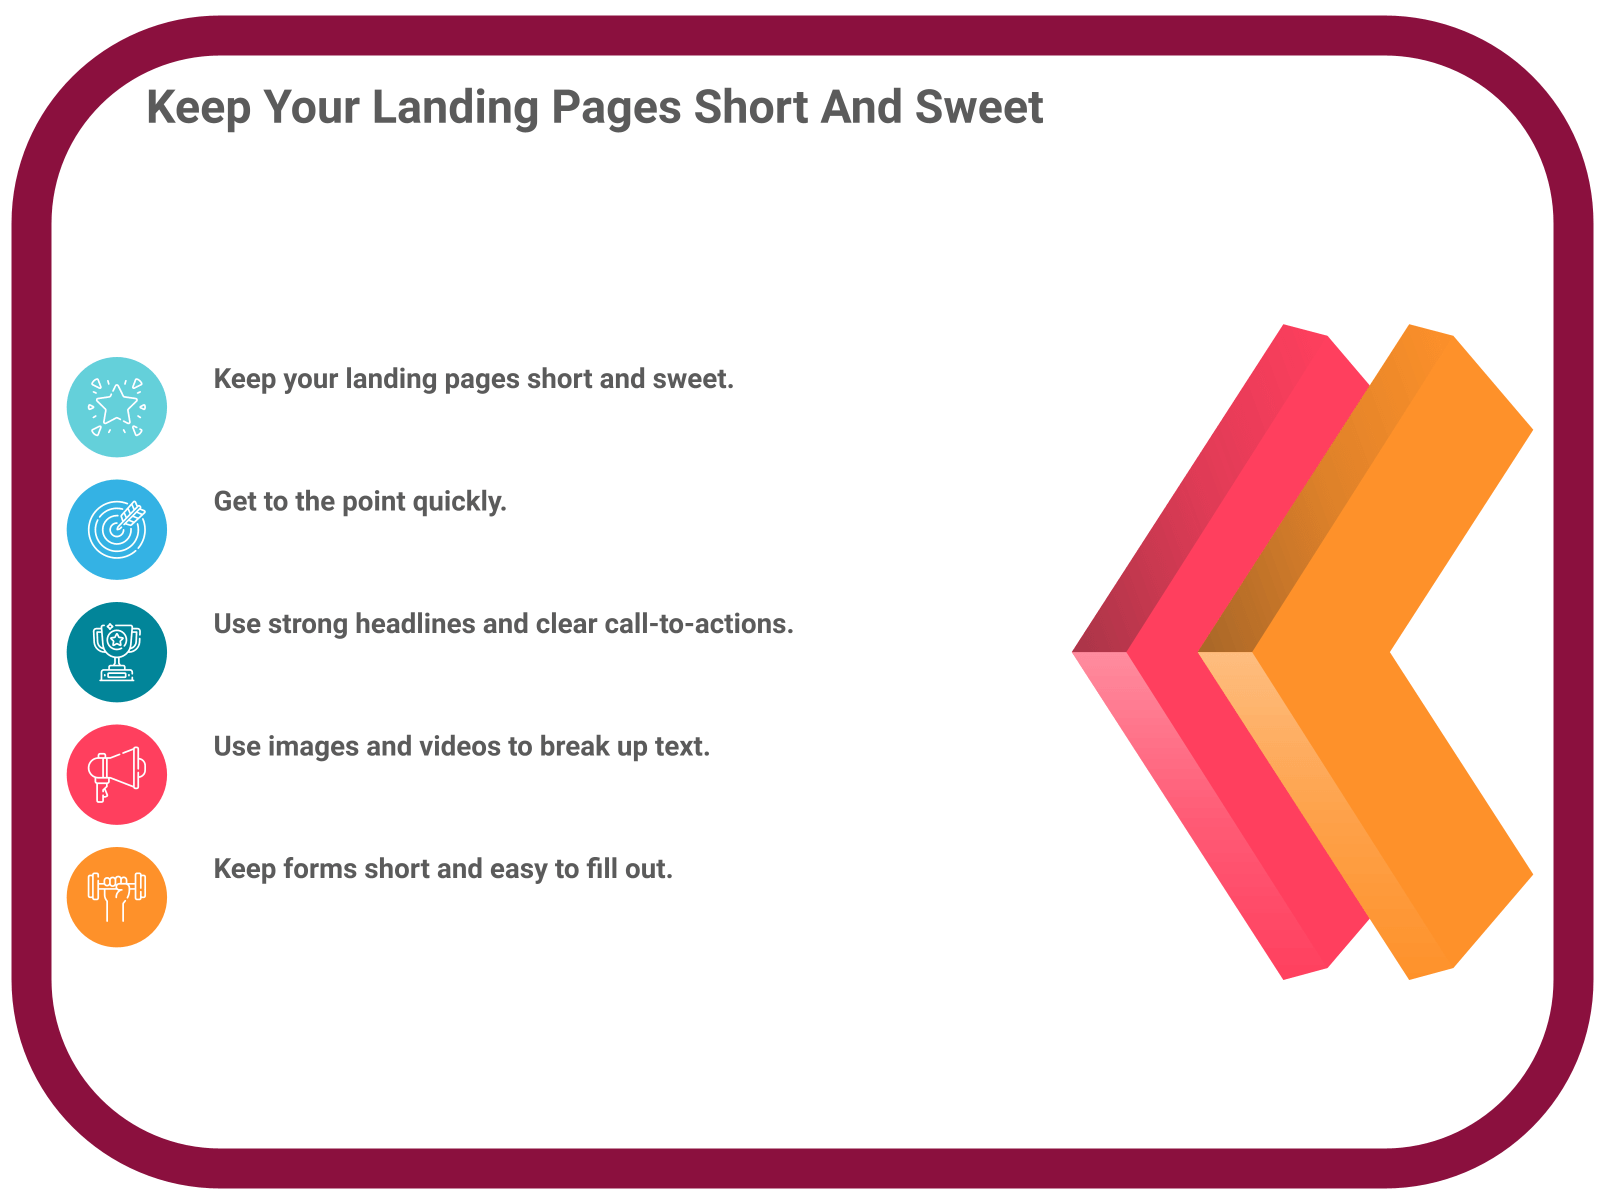 INFOGRAPHIC: Keep your landing pages short and sweet - Poll the People